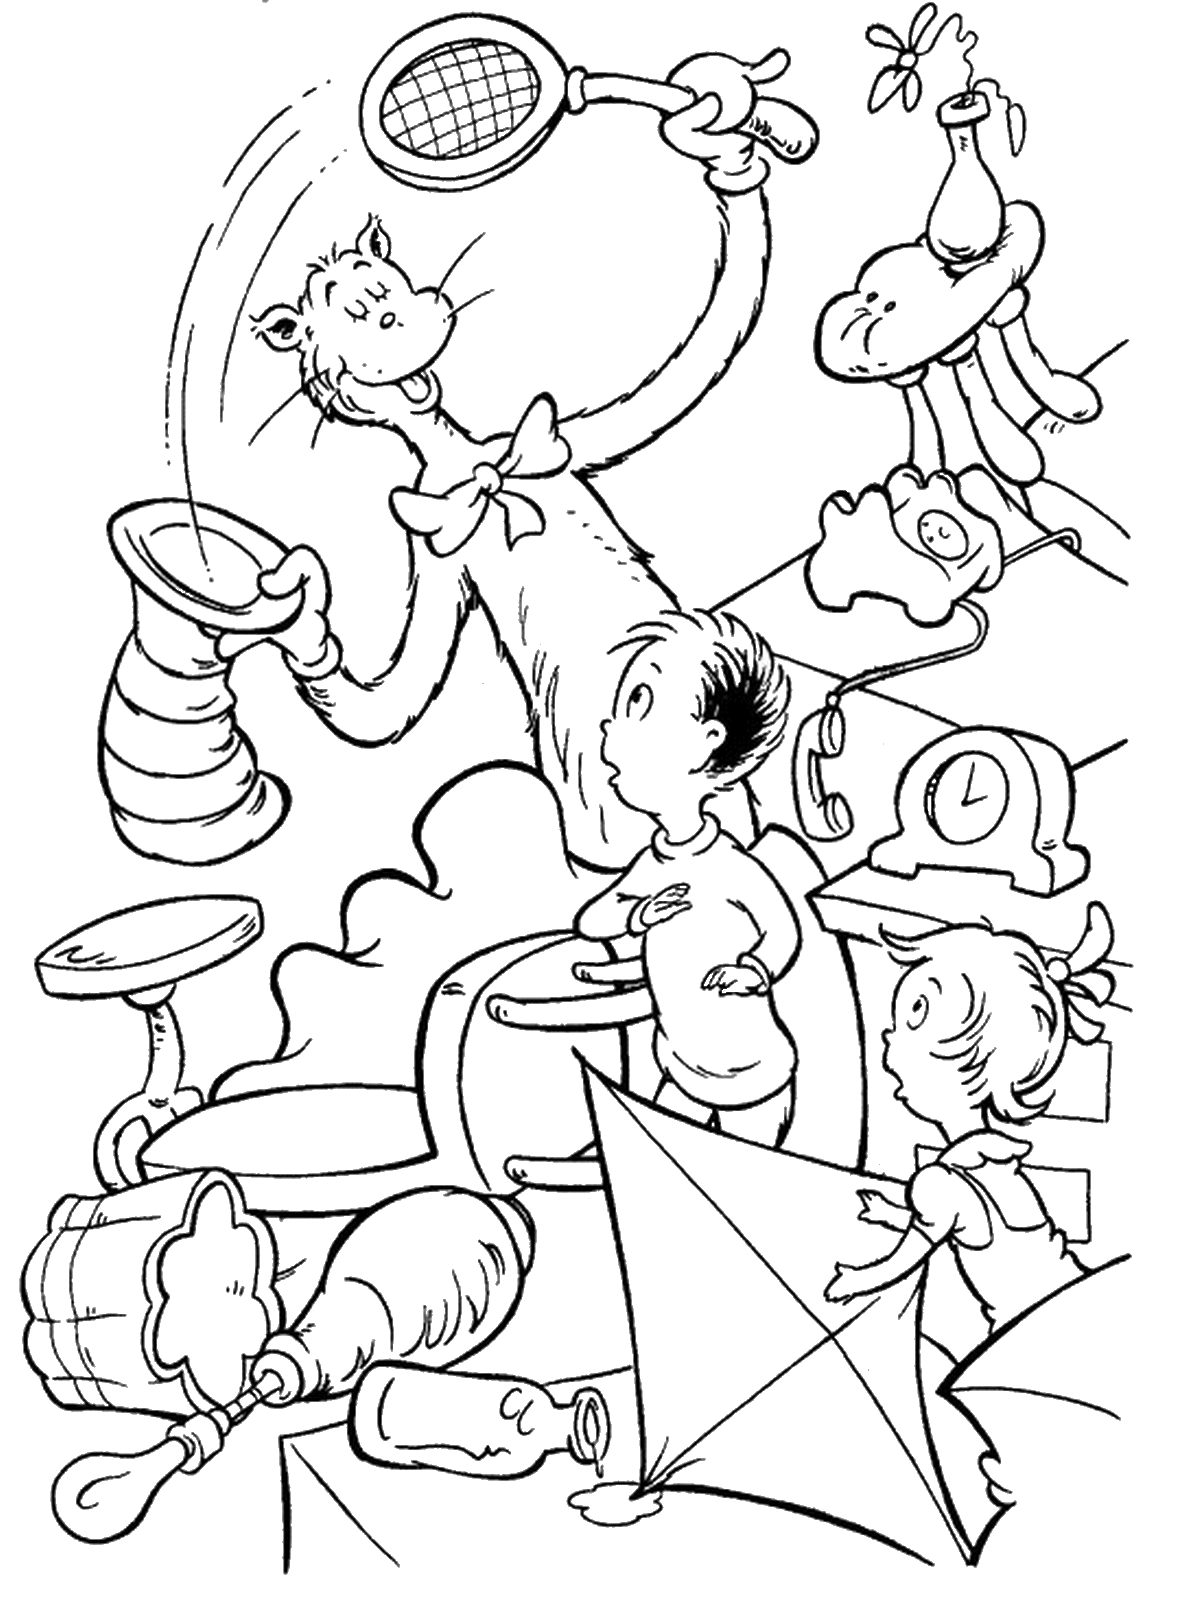 The Cat in the Hat Coloring Pages Cartoons cat_hat_cl_34 Printable 2020 6396 Coloring4free